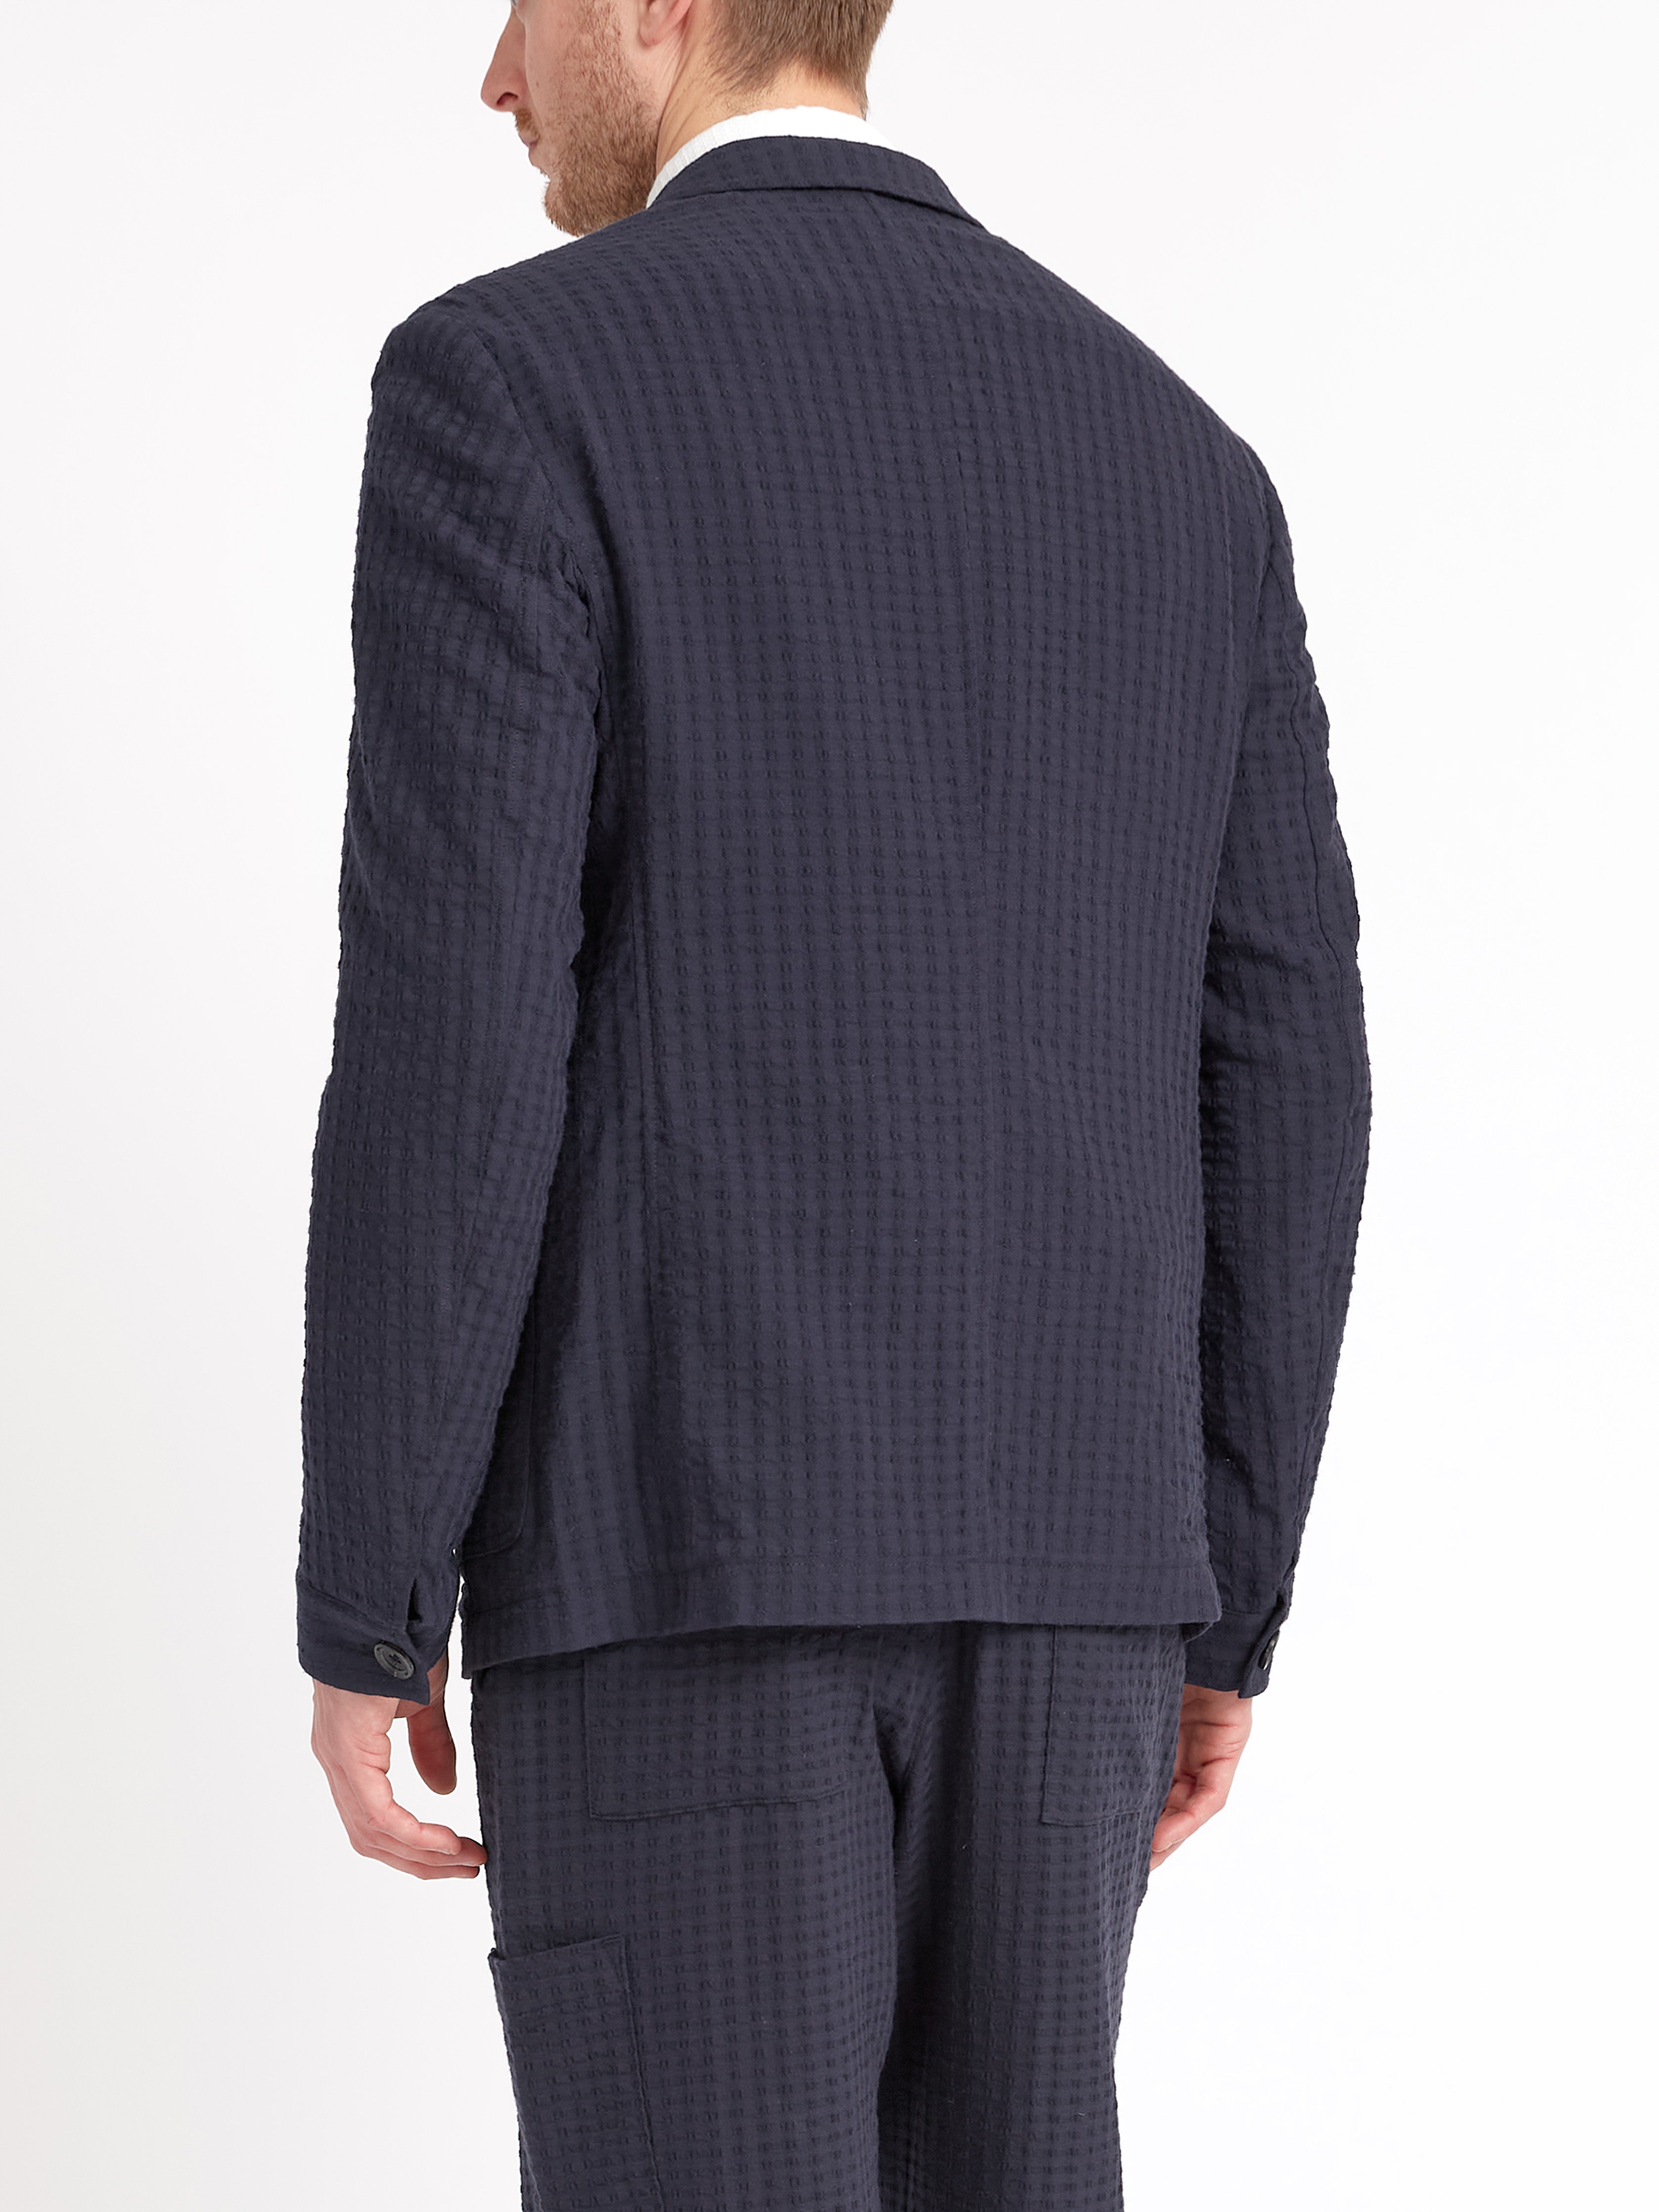 Navy Sampson Solms Suit